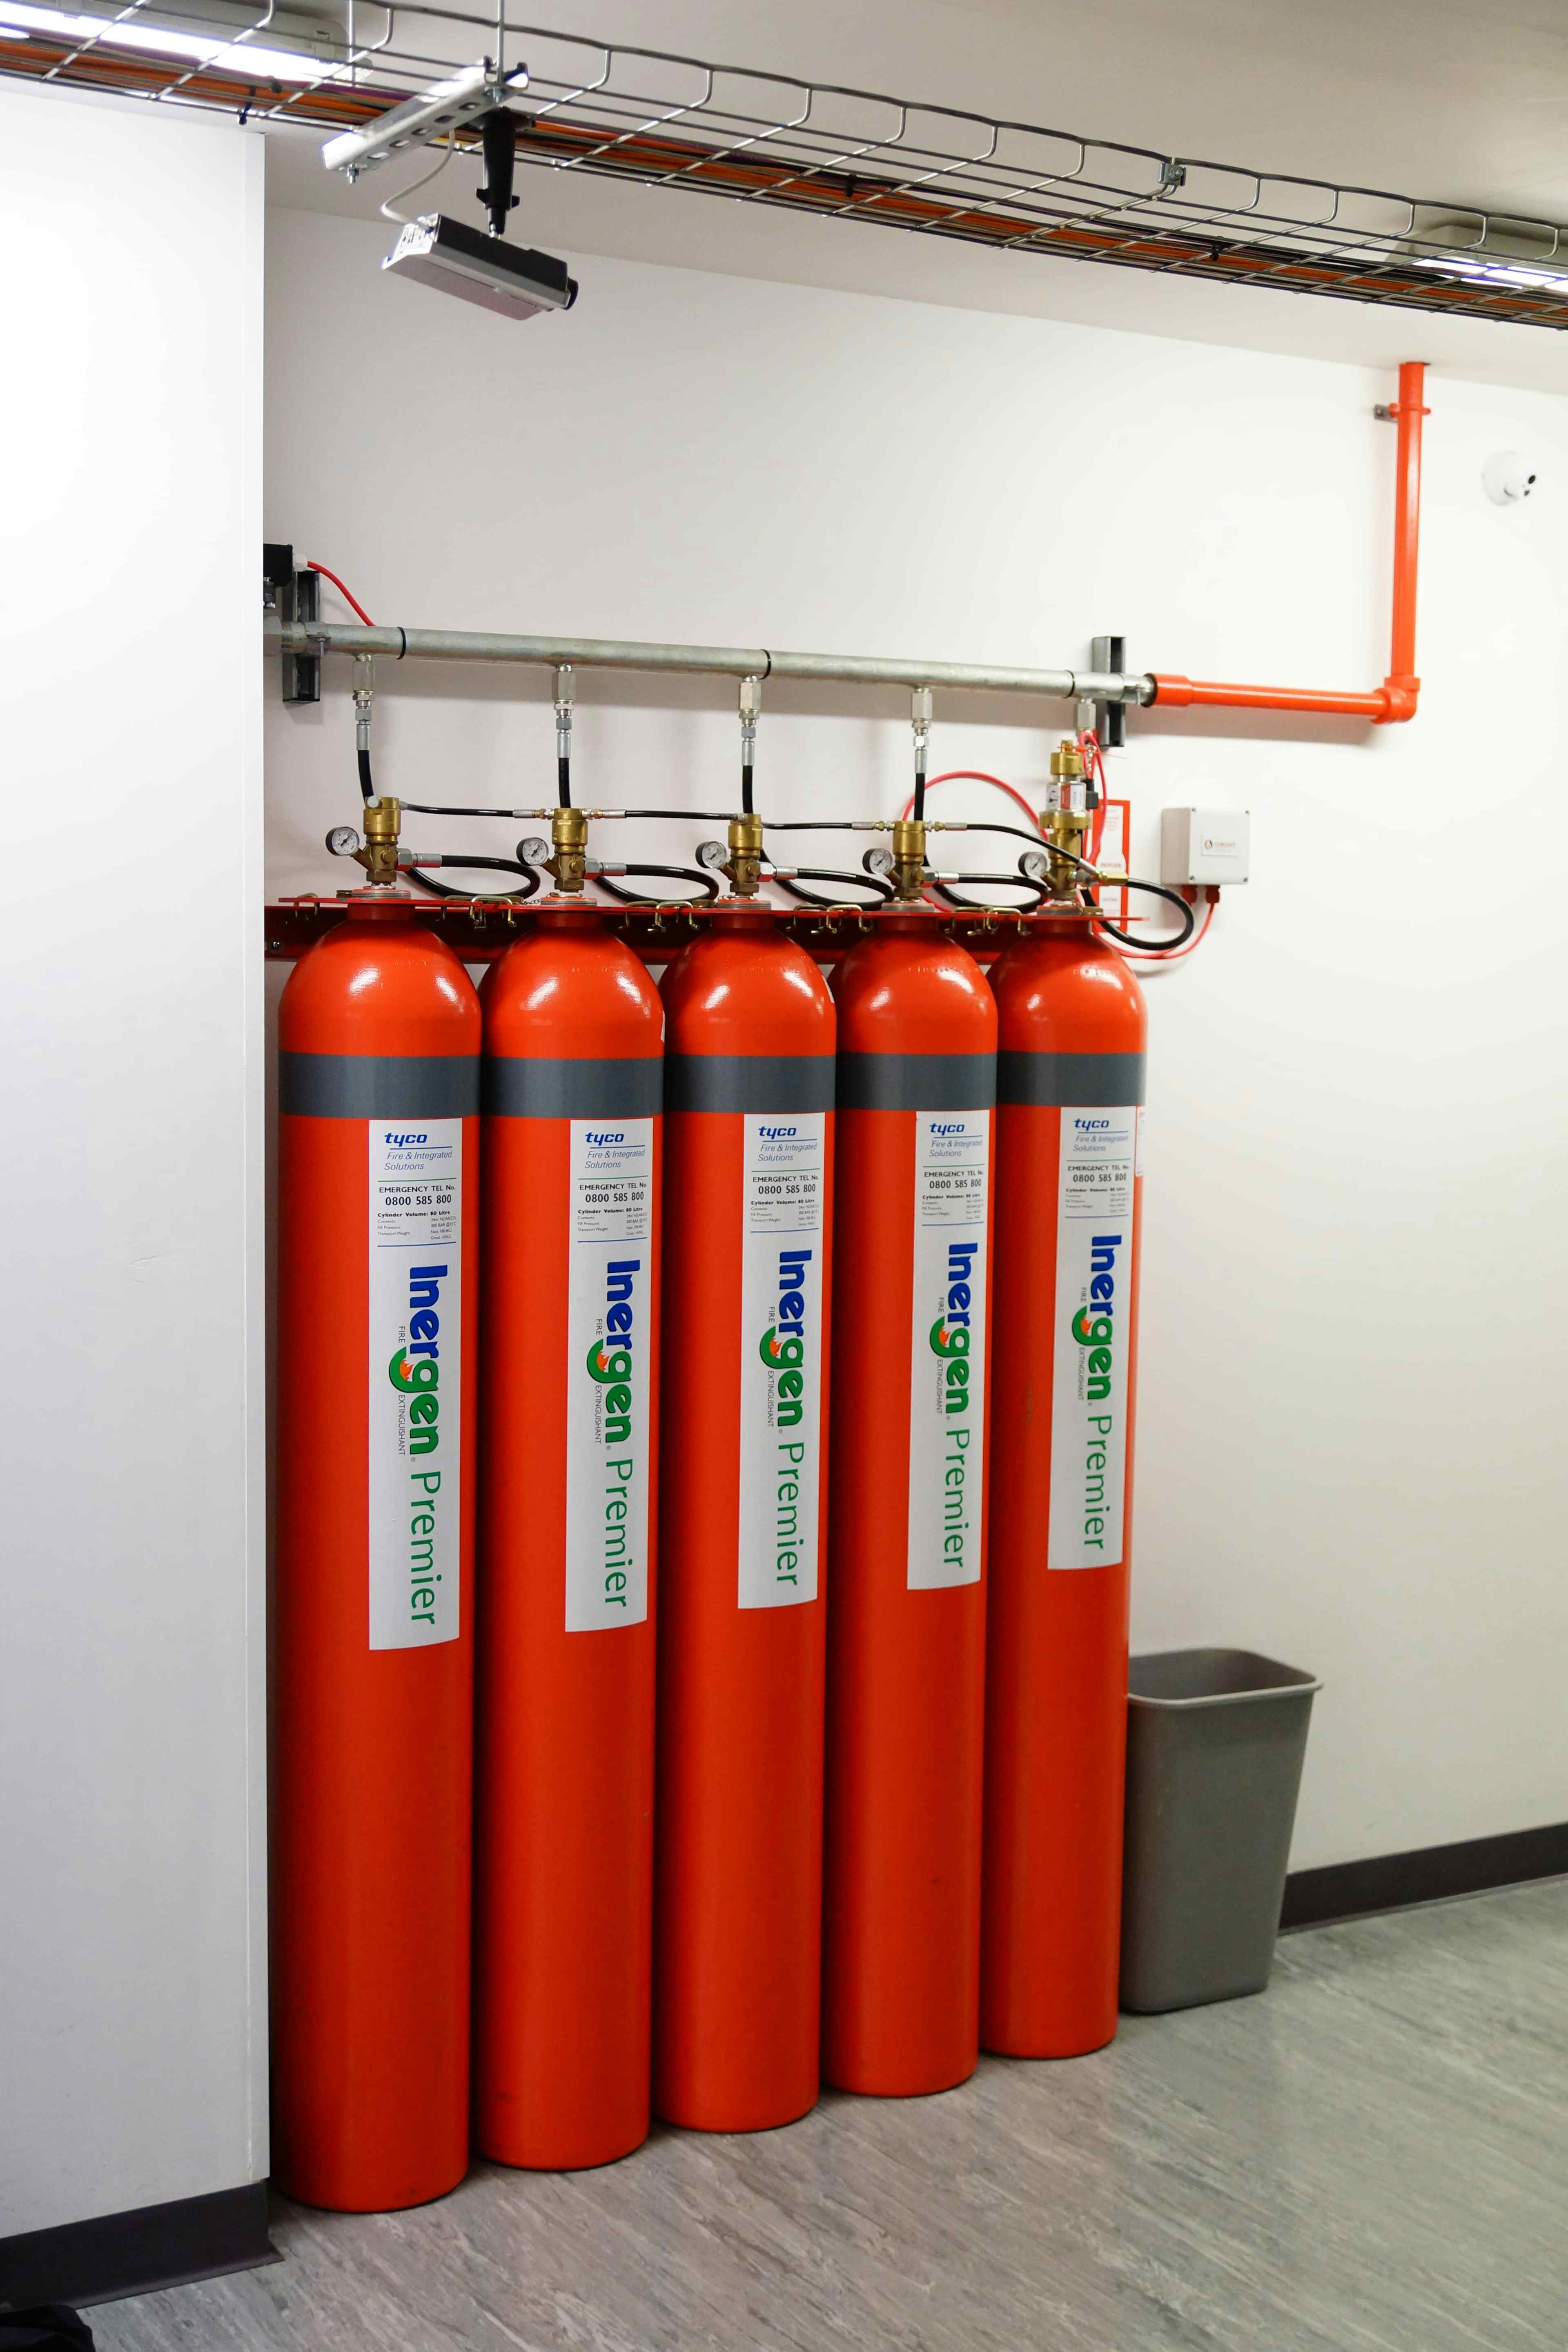 Reliance House - Newcastle - Fire suppression bottles